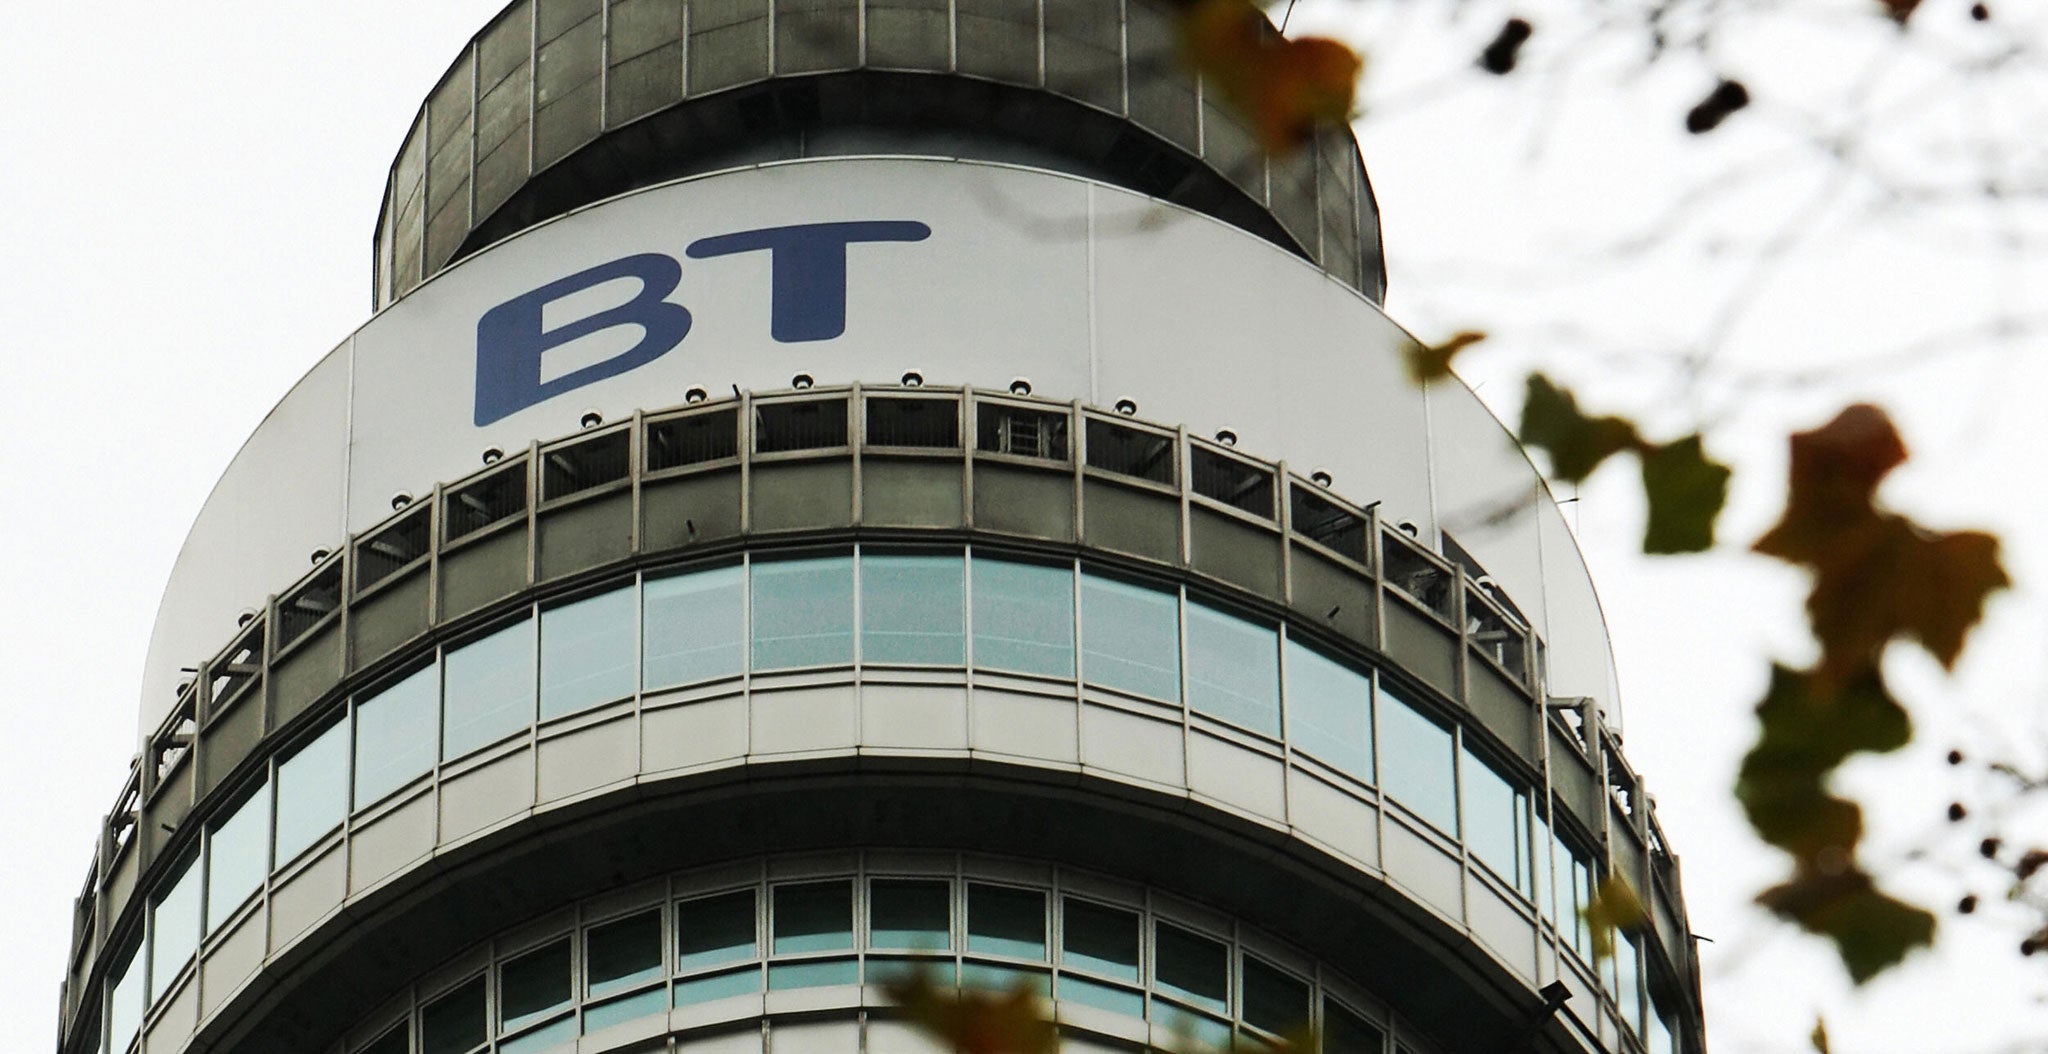 Obfuscation? BT's charging policy for its caller display service is confusing many of its customers